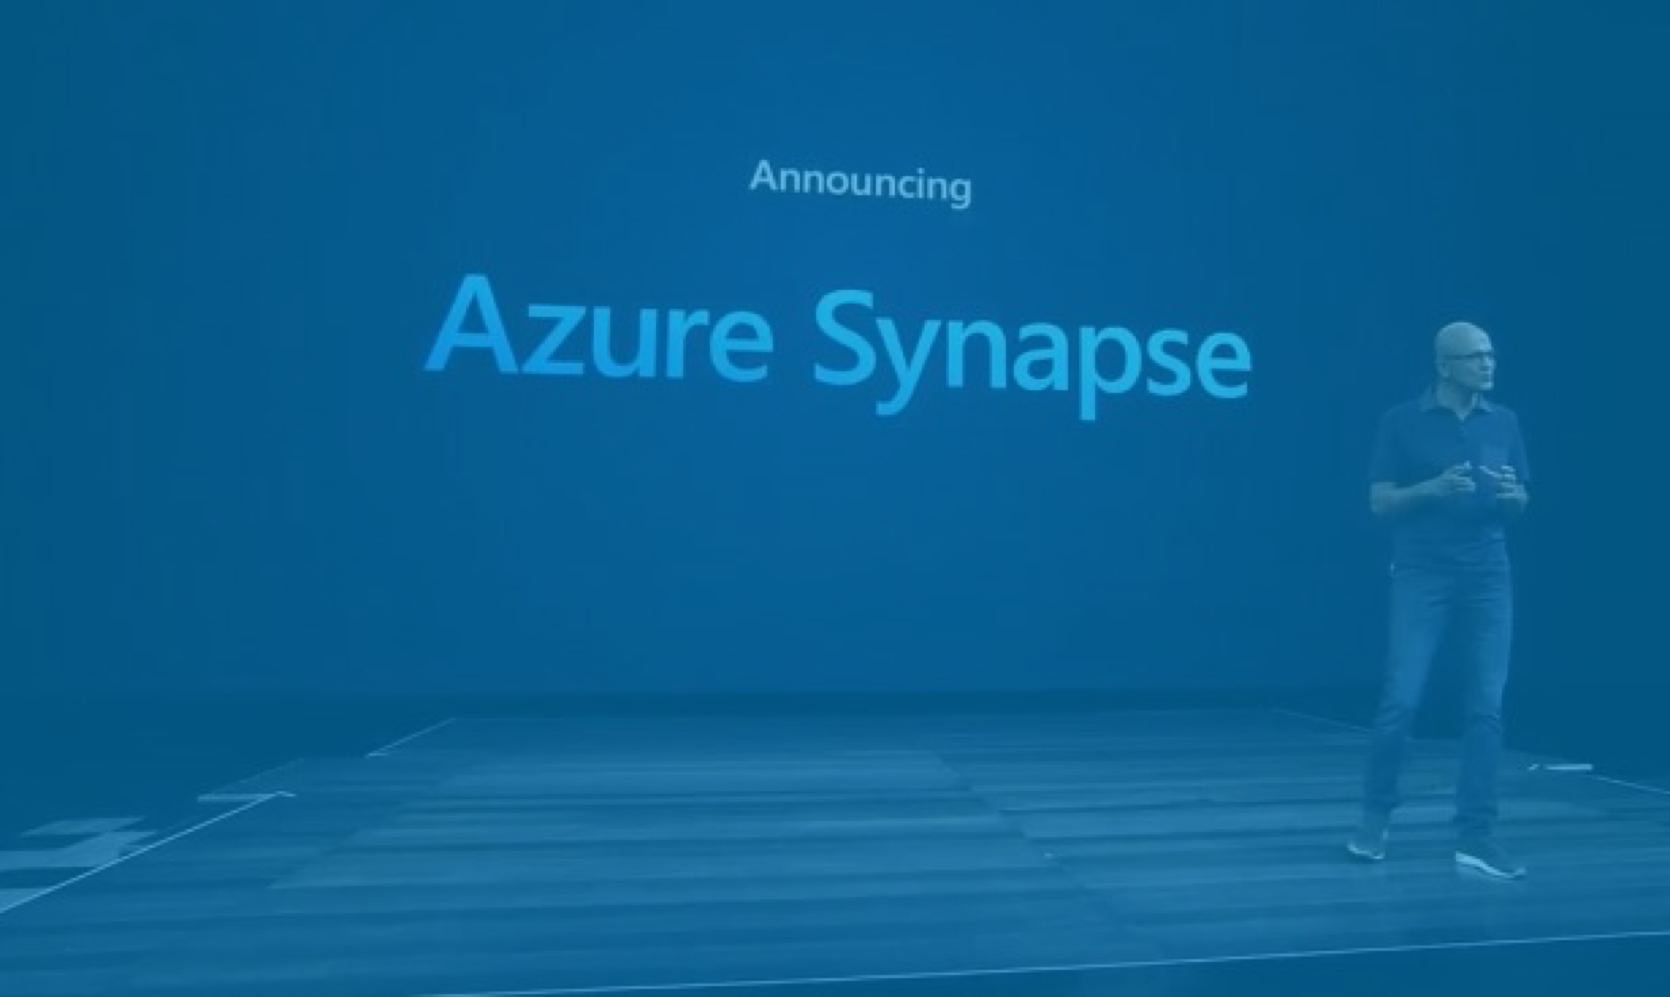 What is Azure Synapse and how is it different from Azure Databricks?